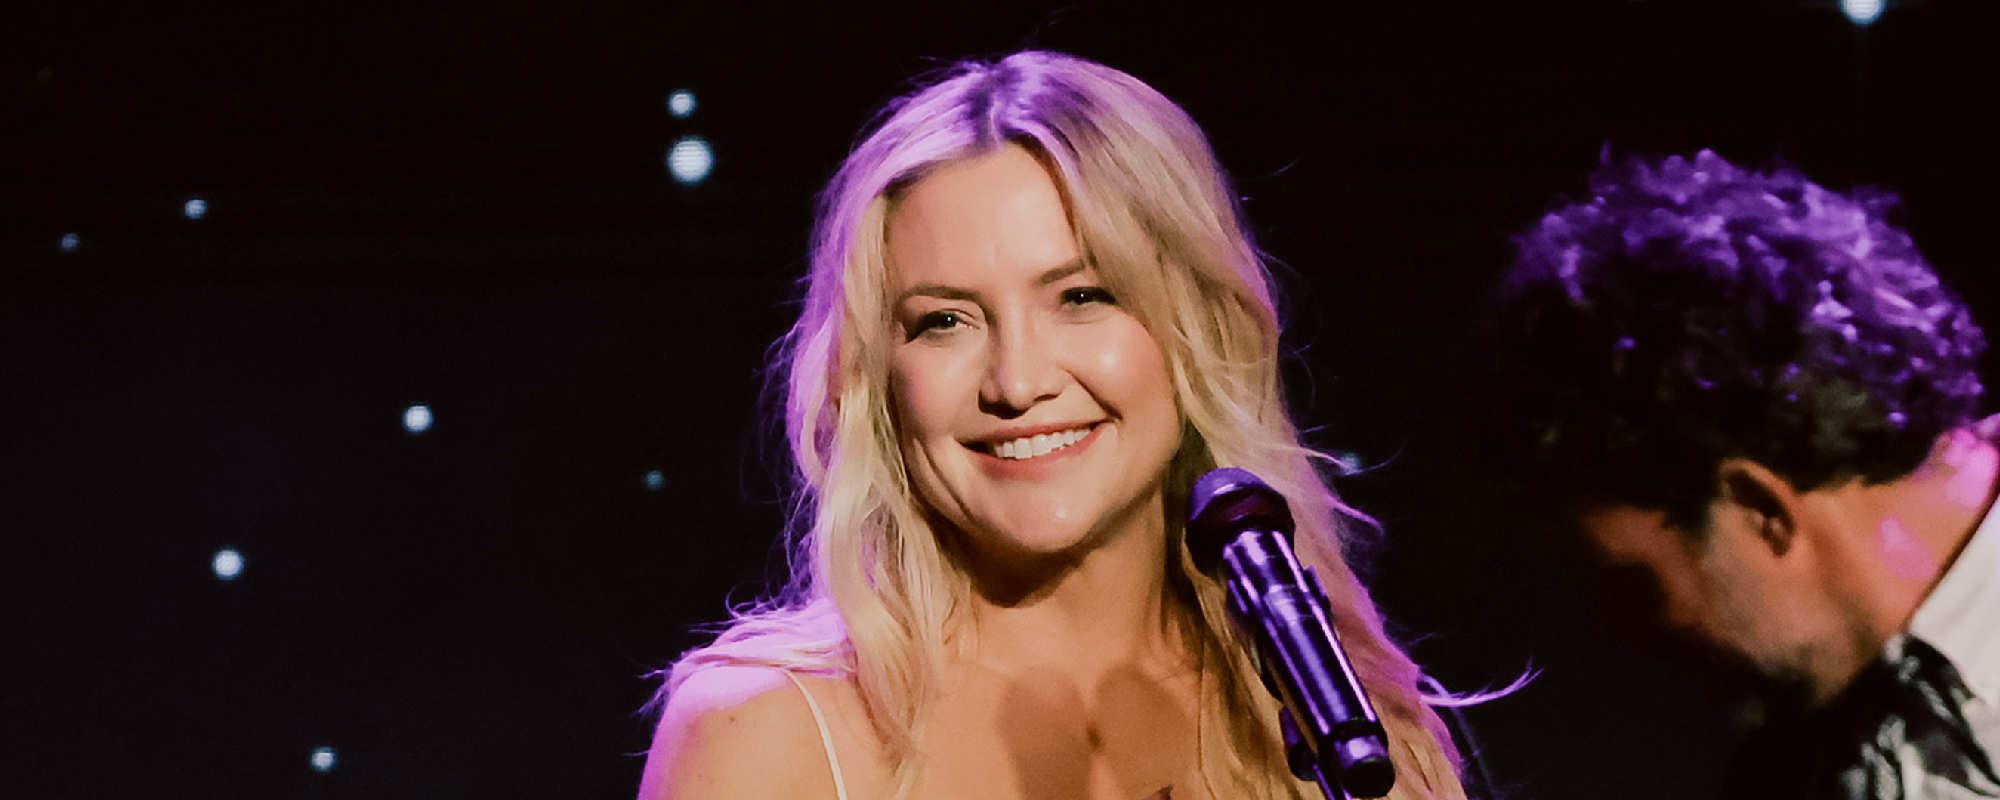 Kate Hudson Flaunts Her Vocal Chops With “Talk About Love” Performance at GLAAD Media Awards